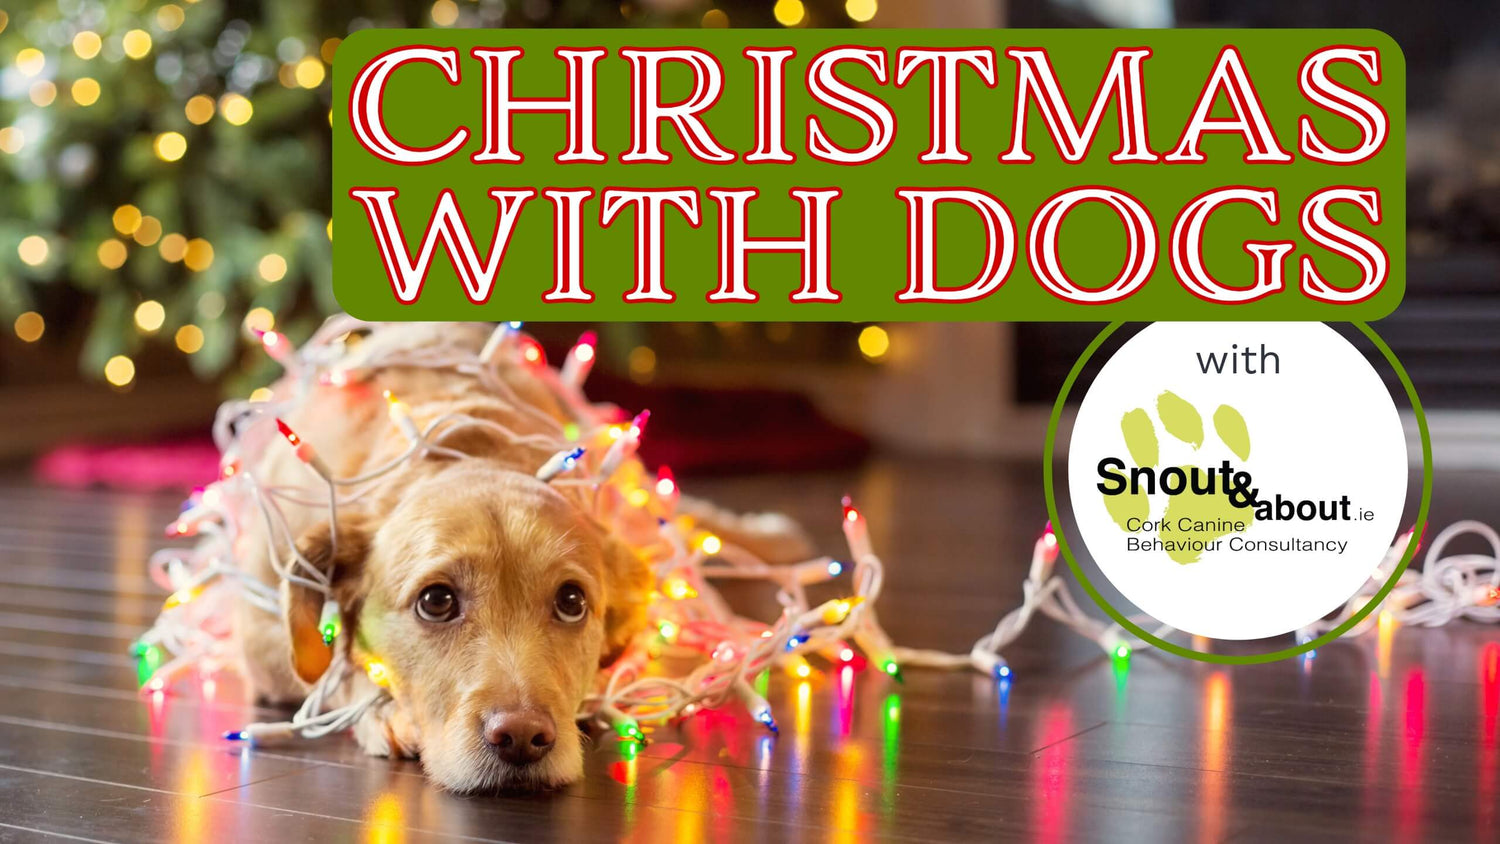 A dog tangled into colourful fairy lights and a box with text “Christmas with Dogs”